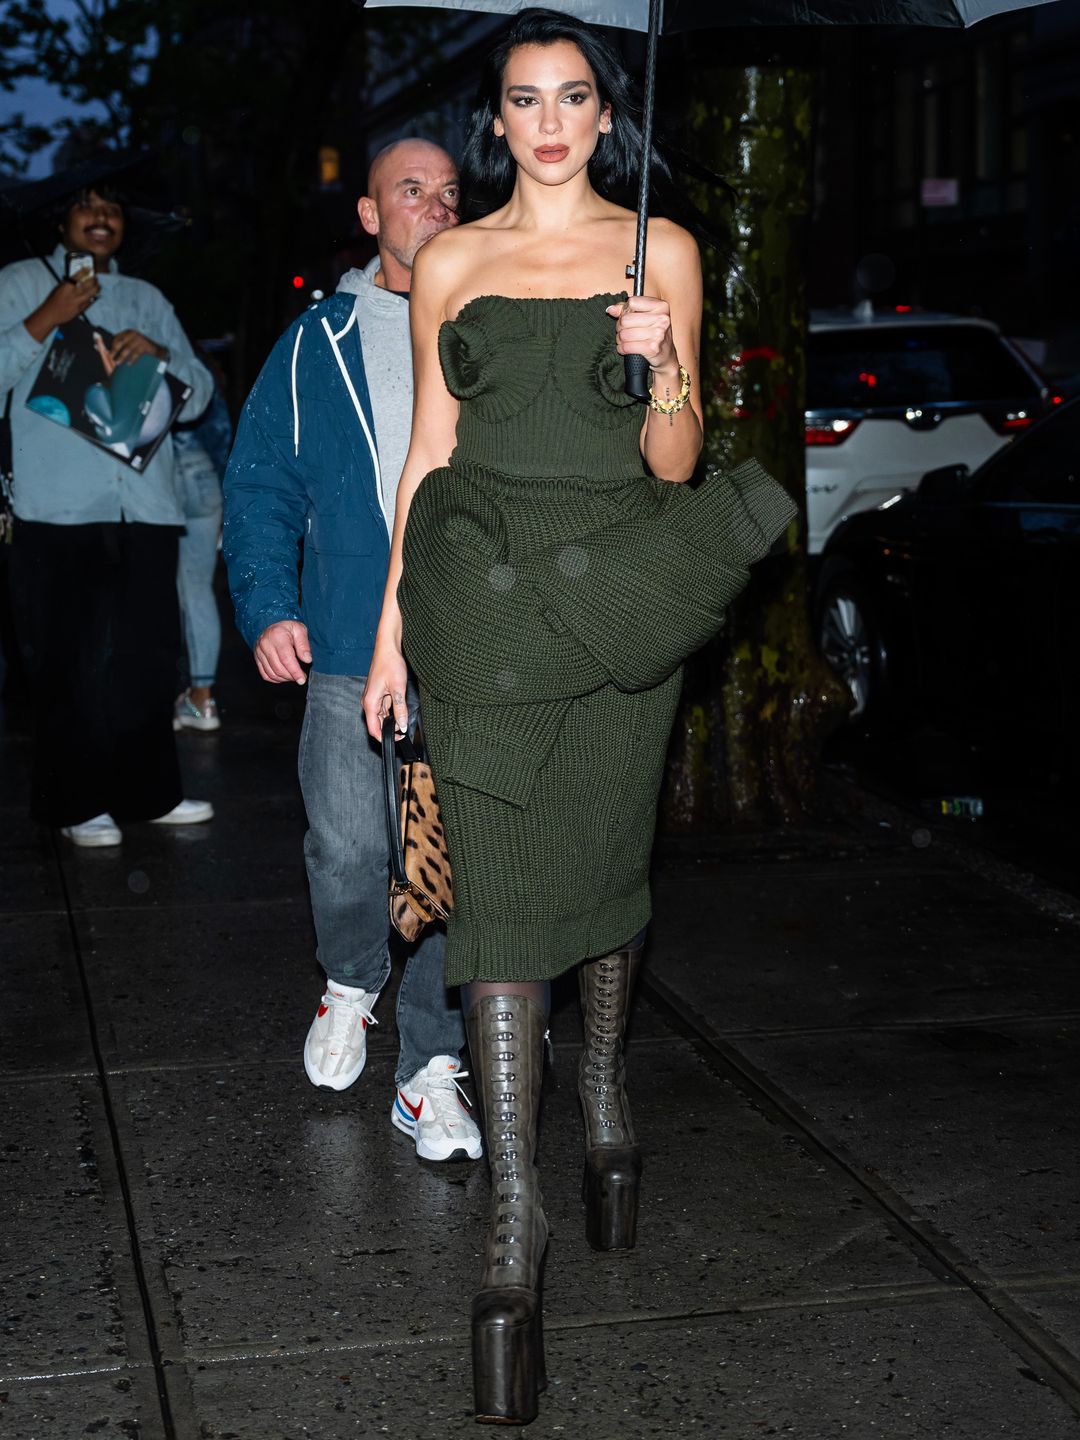 NEW YORK, NEW YORK - APRIL 30: Dua Lipa is seen arriving for a pre-Met Gala dinner hosted by Anna Wintour in SoHo on April 30, 2023 in New York City. (Photo by Gotham/GC Images)